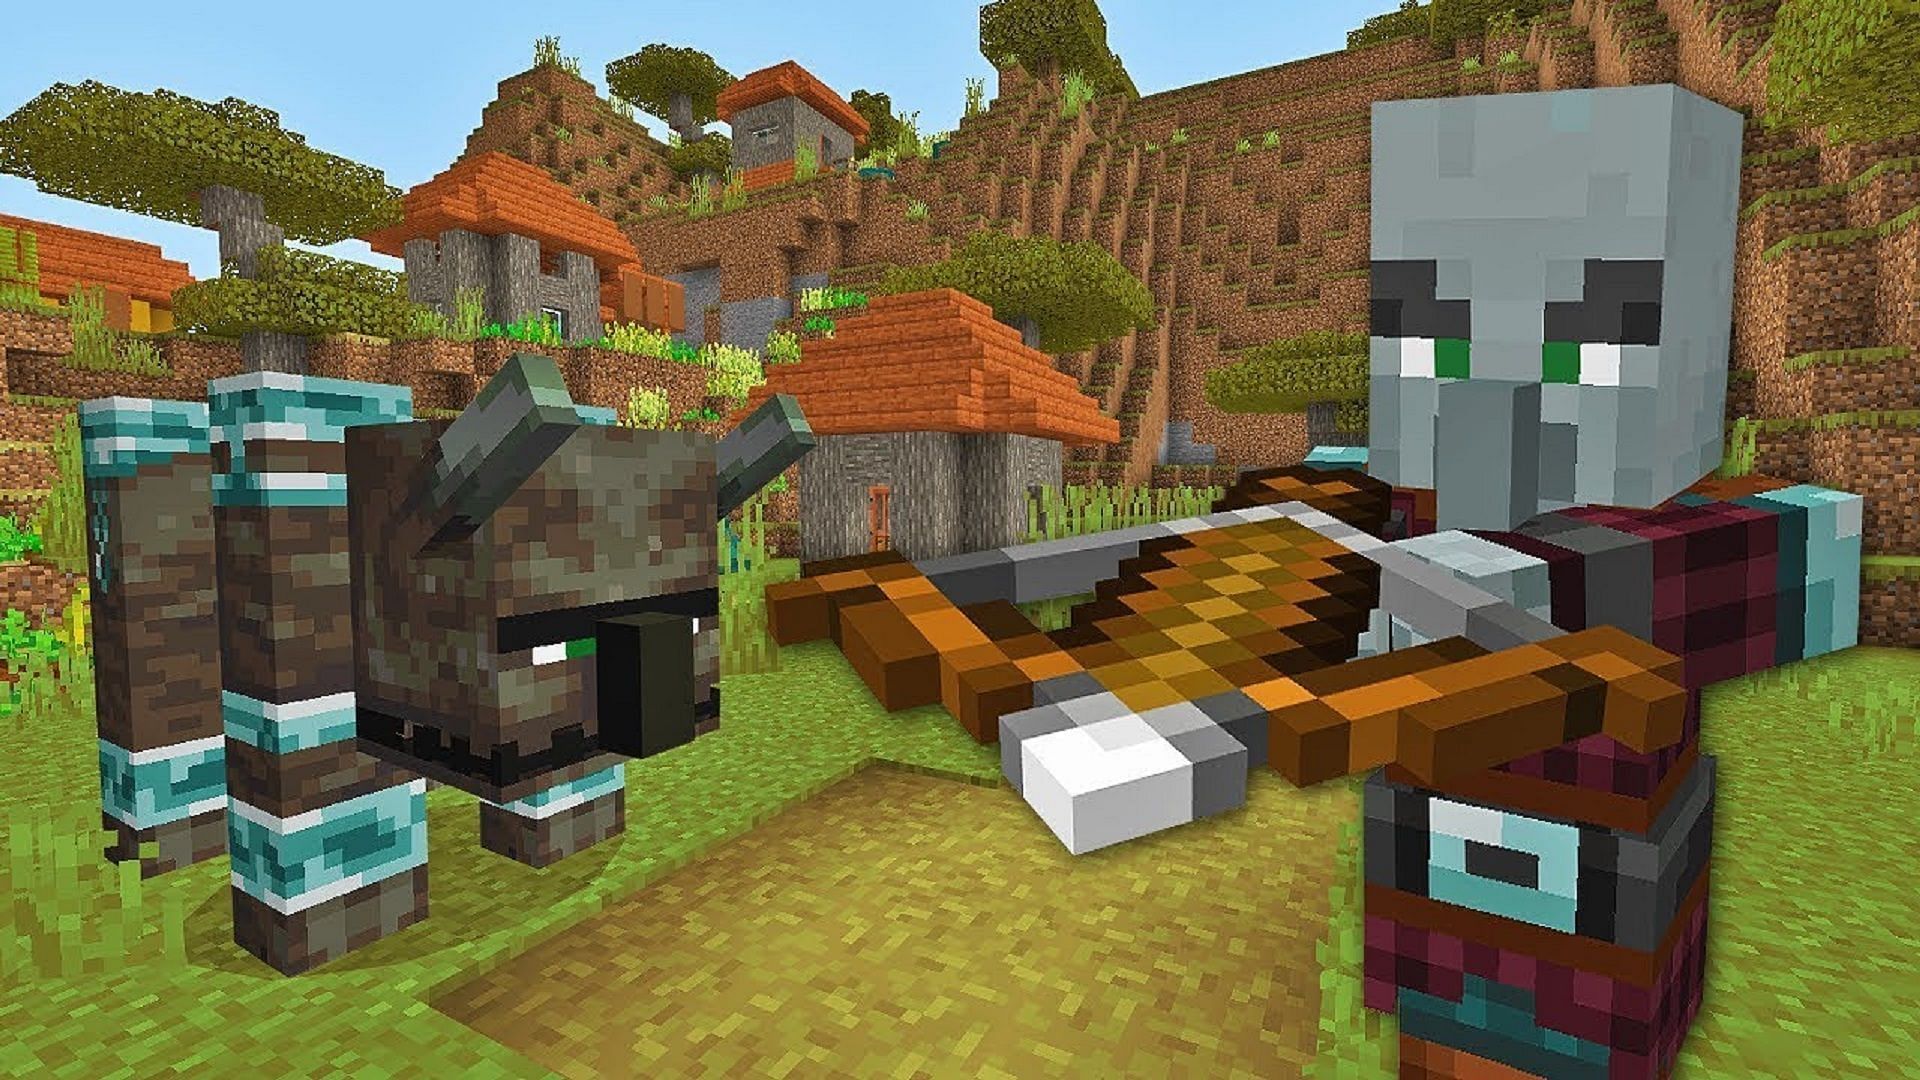 Pillagers are normally hostile in Minecraft (Image via SB737/Youtube)